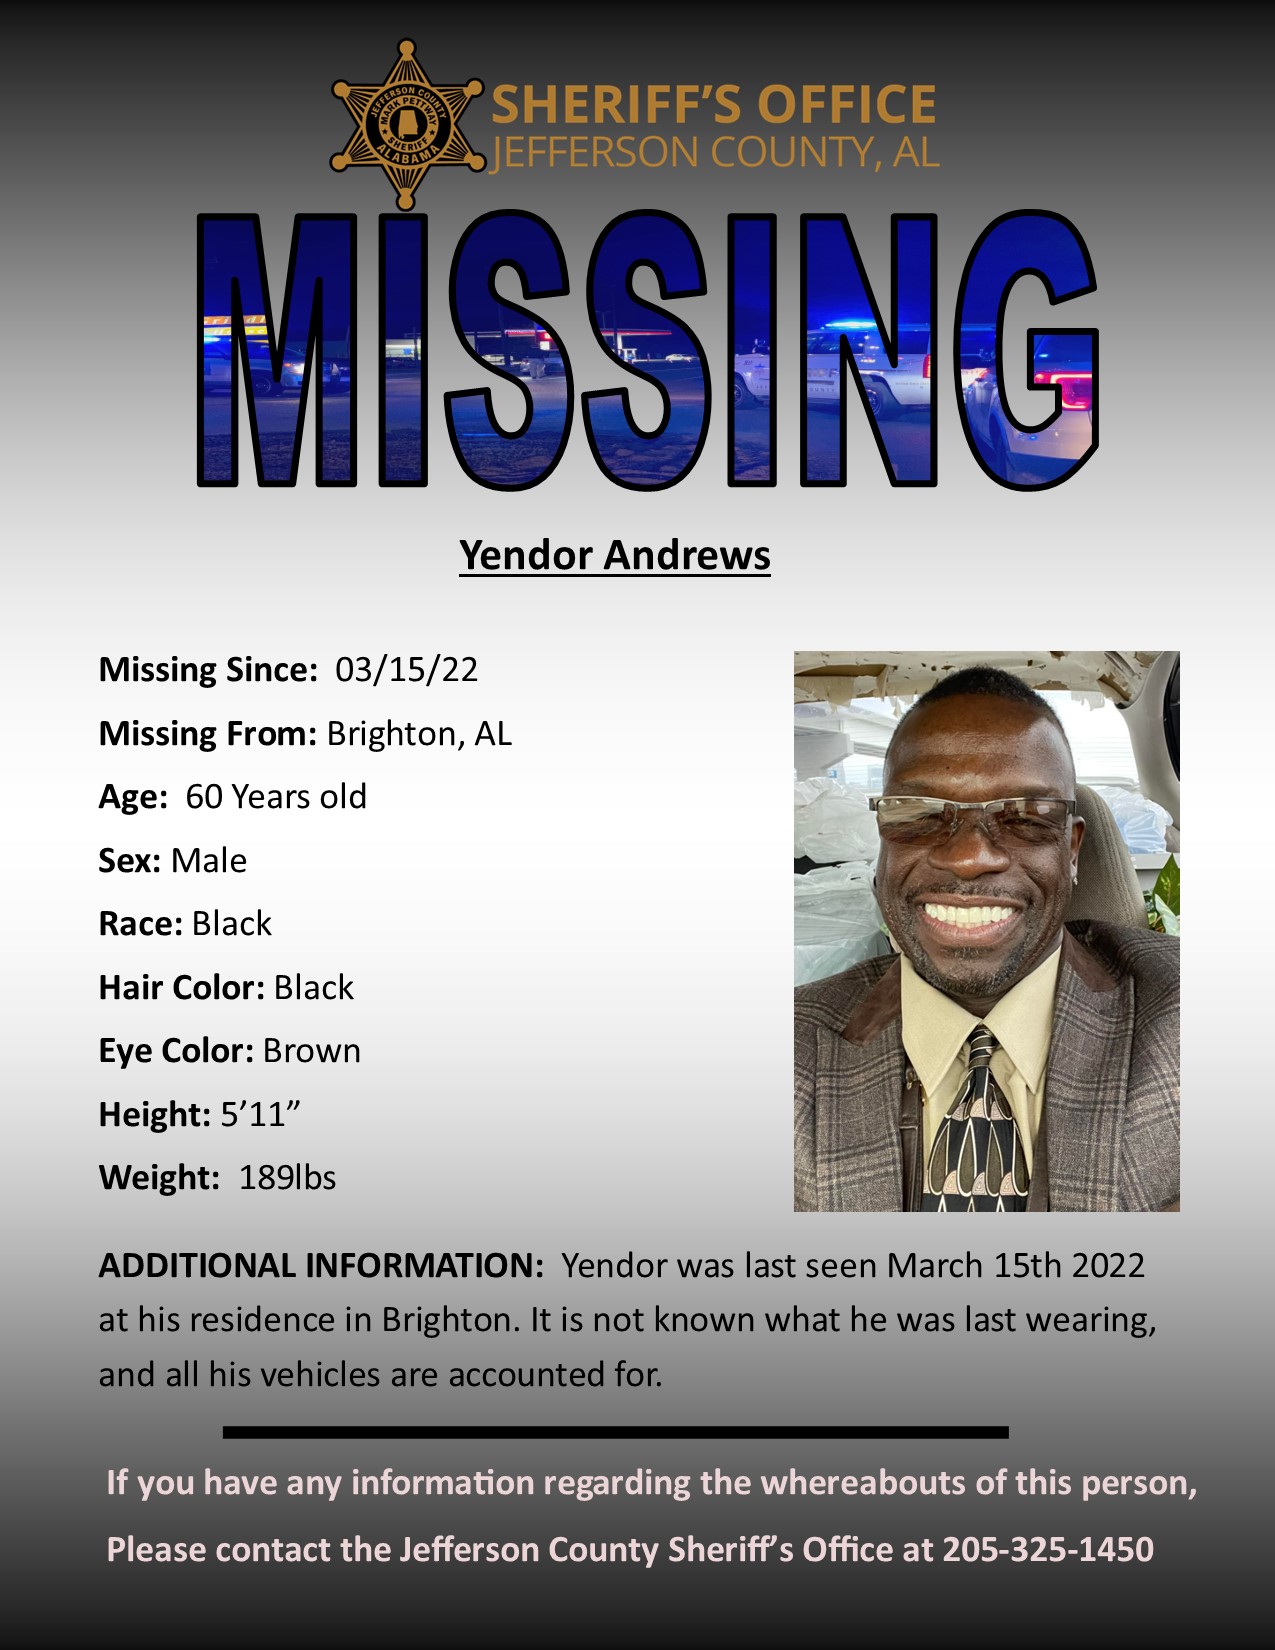 Missing Persons - Jefferson County Sheriff's Office